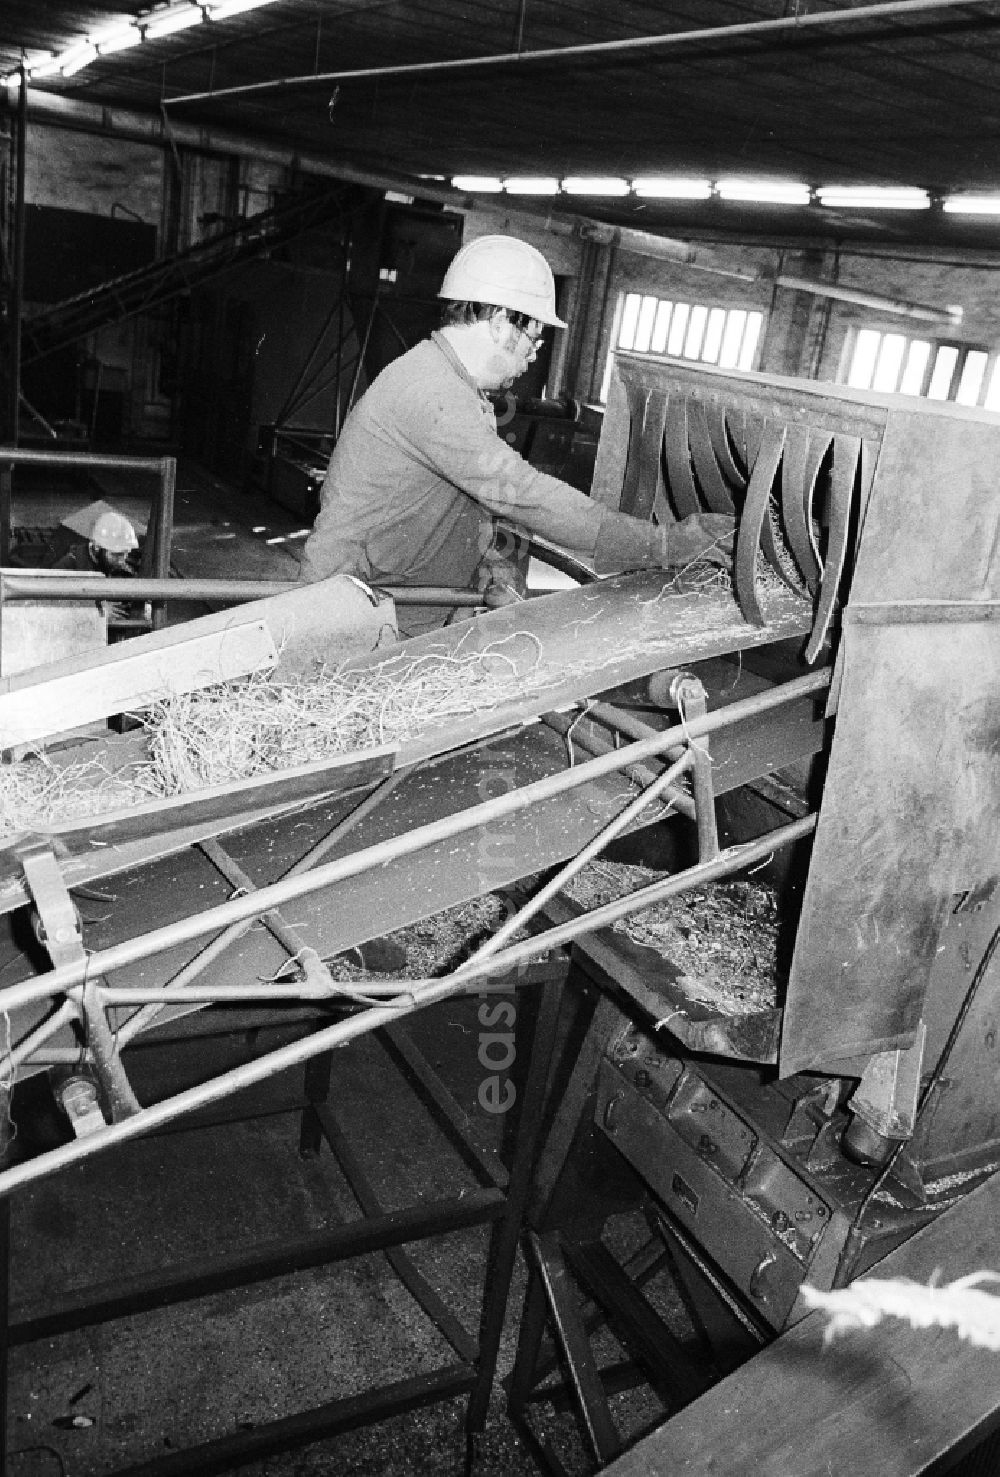 GDR picture archive: Berlin - Valuable material separation in the combine VEB secondary raw material capture (SERO) in Berlin, the former capital of the GDR, German democratic republic. An employee separates valuable metals about a conveyor belt run